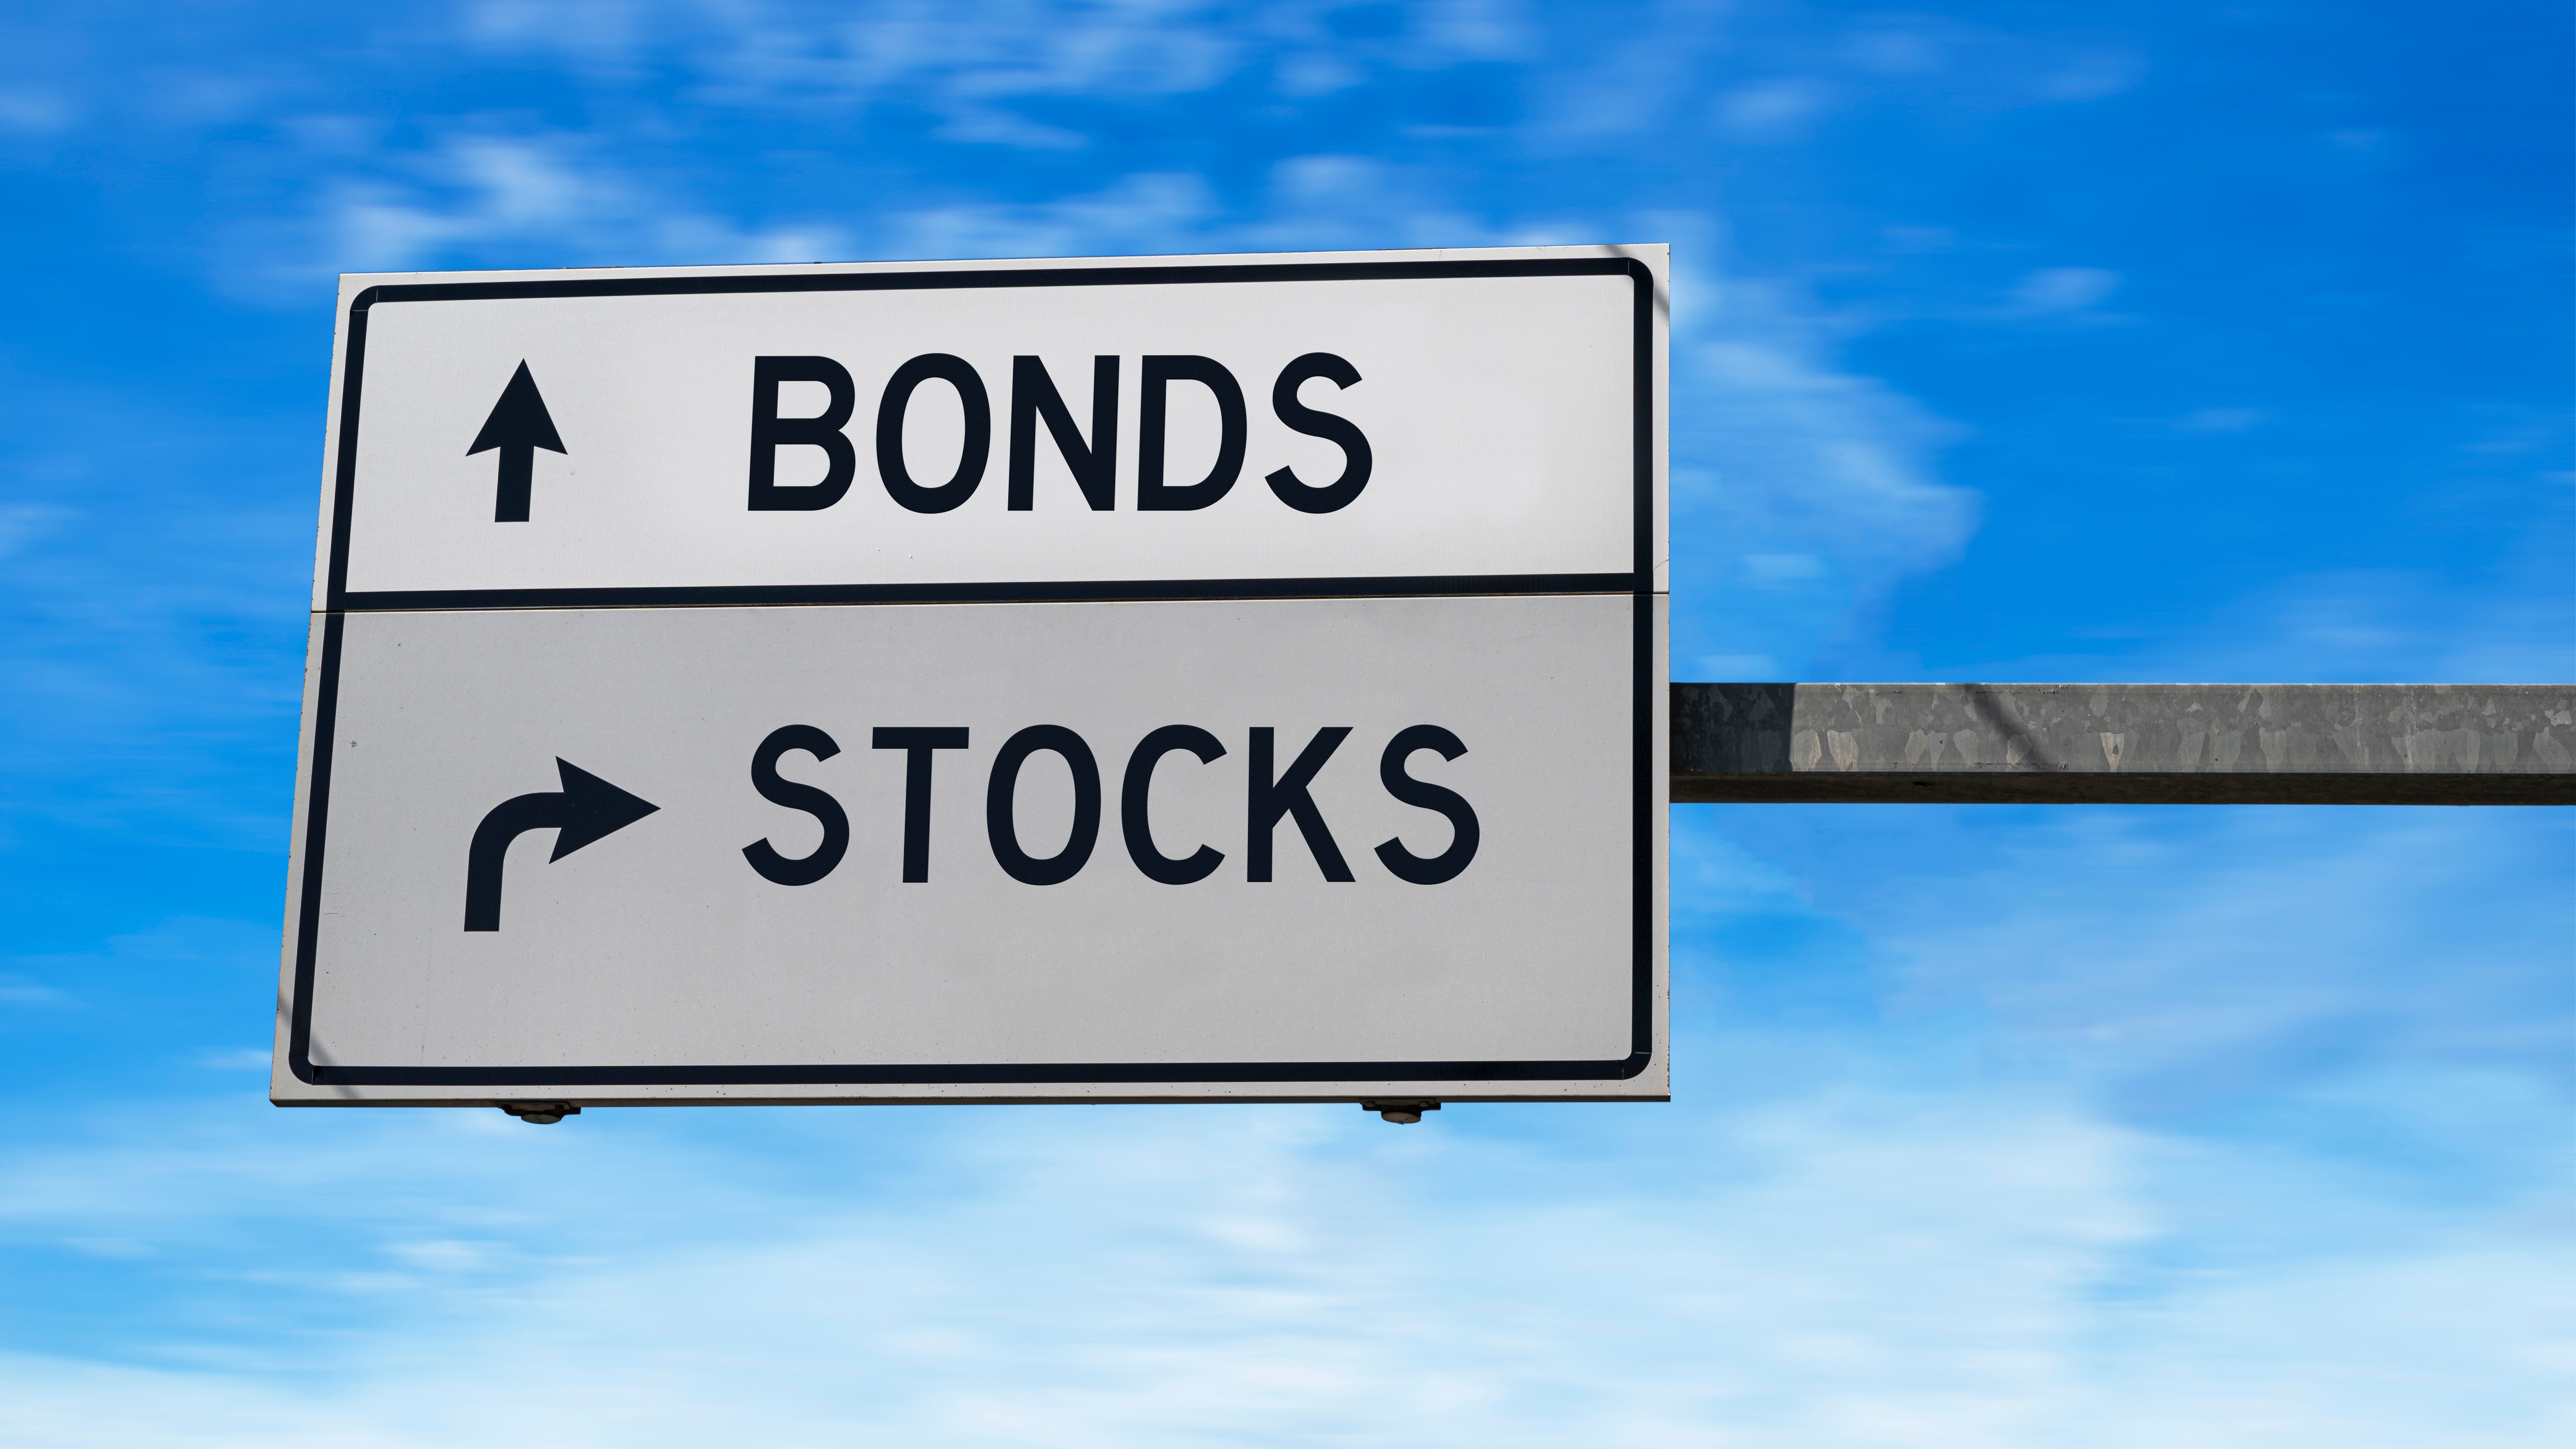 investing in bonds tends to be riskier financial strategy than investing in common stocks